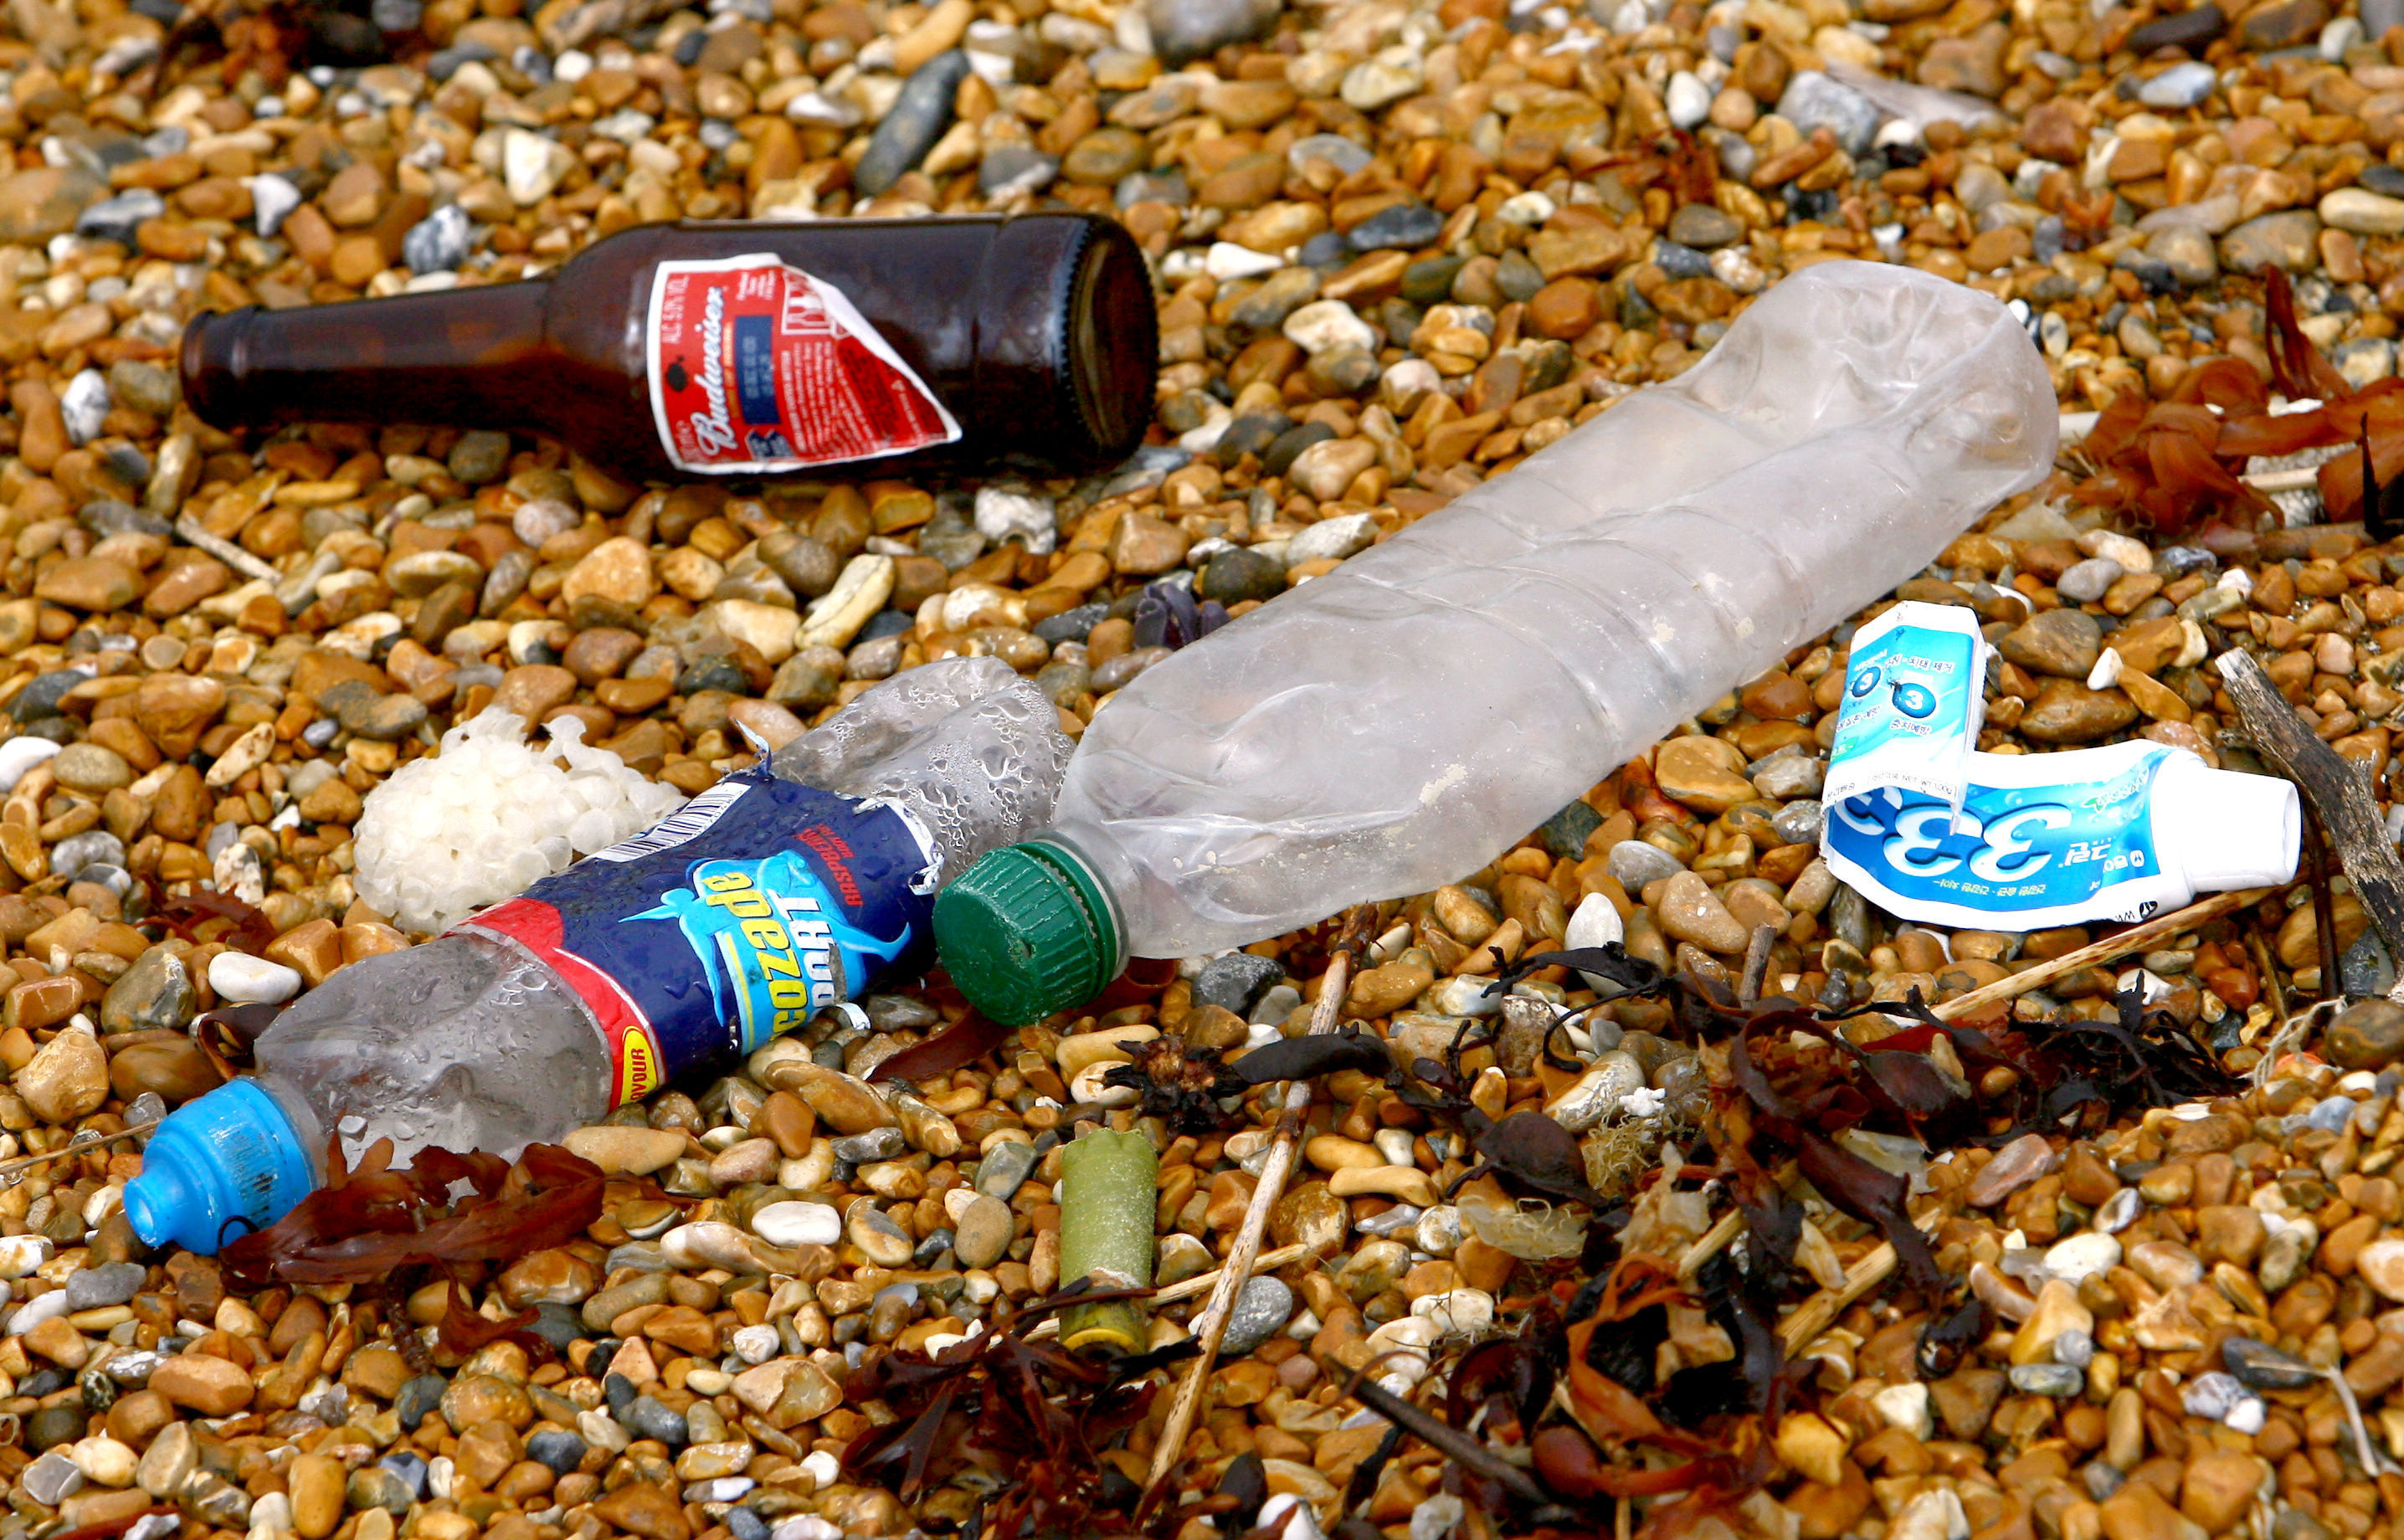 The report warns that overall the amount of plastic waste the country produces is set to rise by a fifth by the end of the next decade - with a 34% rise in crisp packets, 41% more plastic straws and 9% more drinks bottles. (Gareth Fuller/PA Wire)